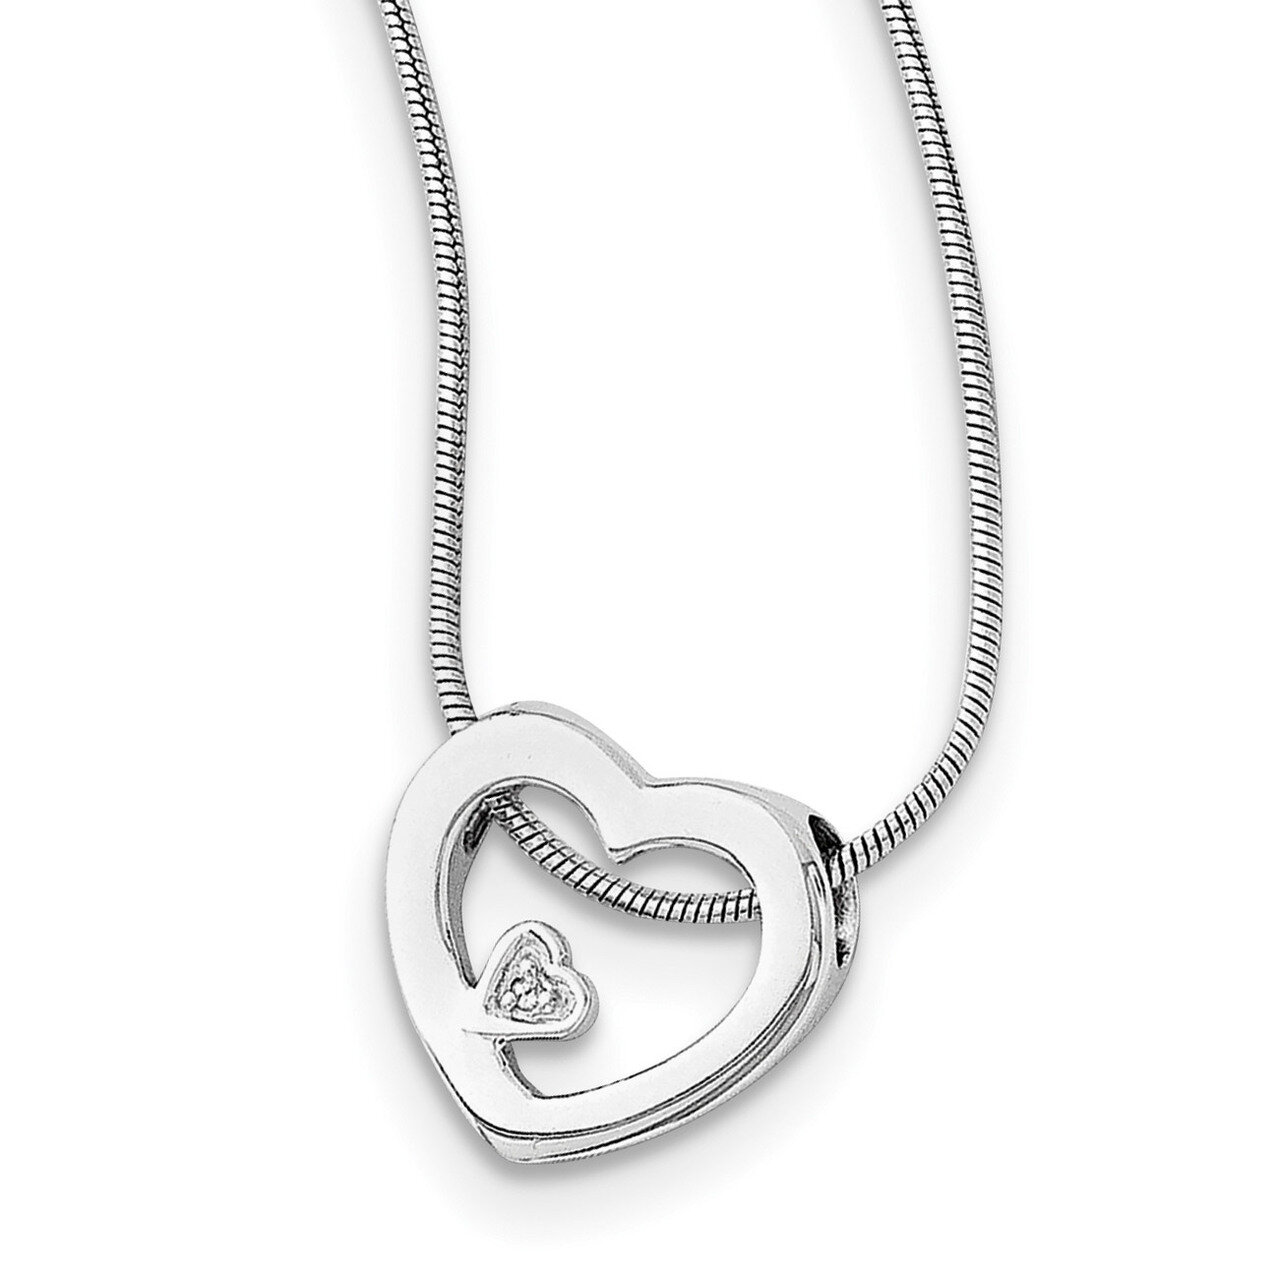 .03Ct Diamond Heart Necklace Sterling Silver QW170-18